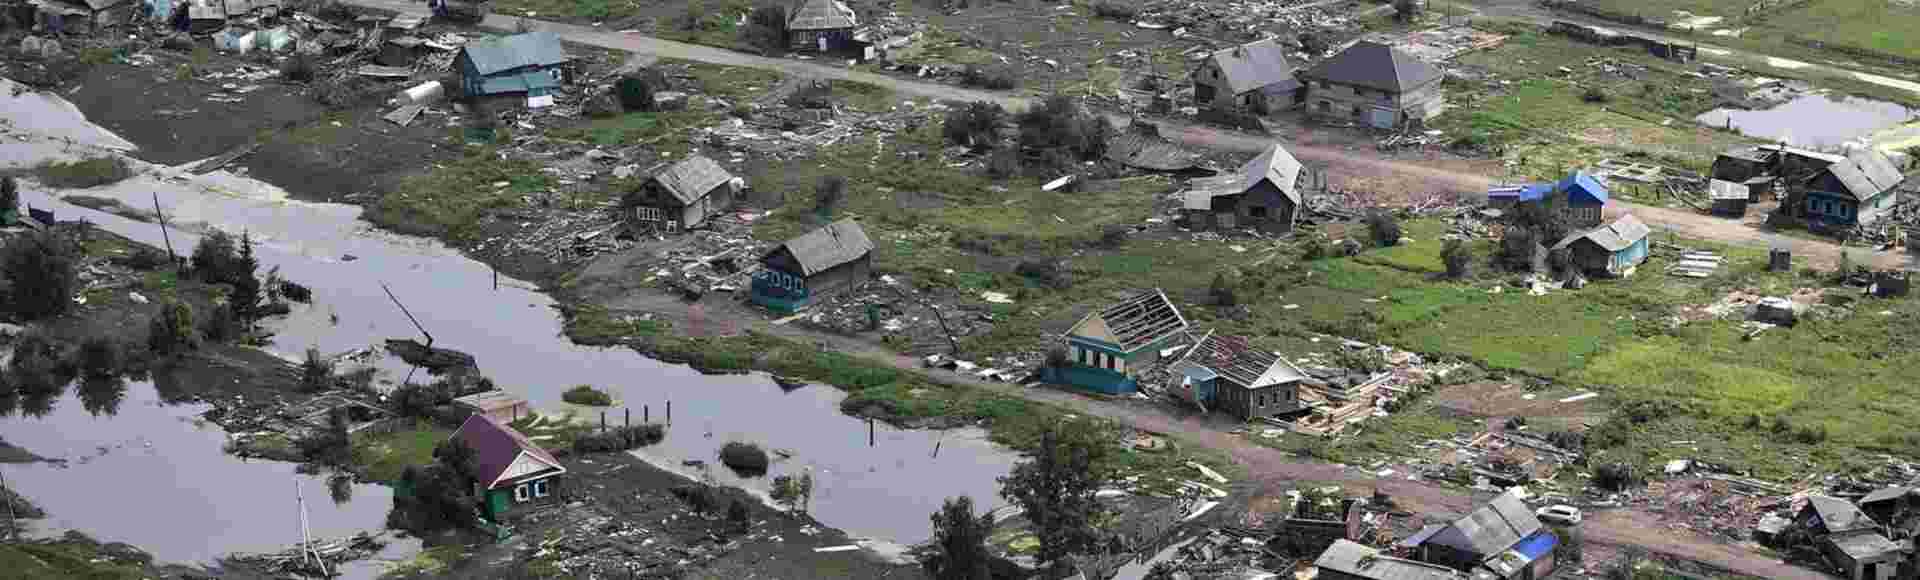 Aerial view of severe damage to homes caused by massive floods in the Irkutsk region of Russia, 2019.